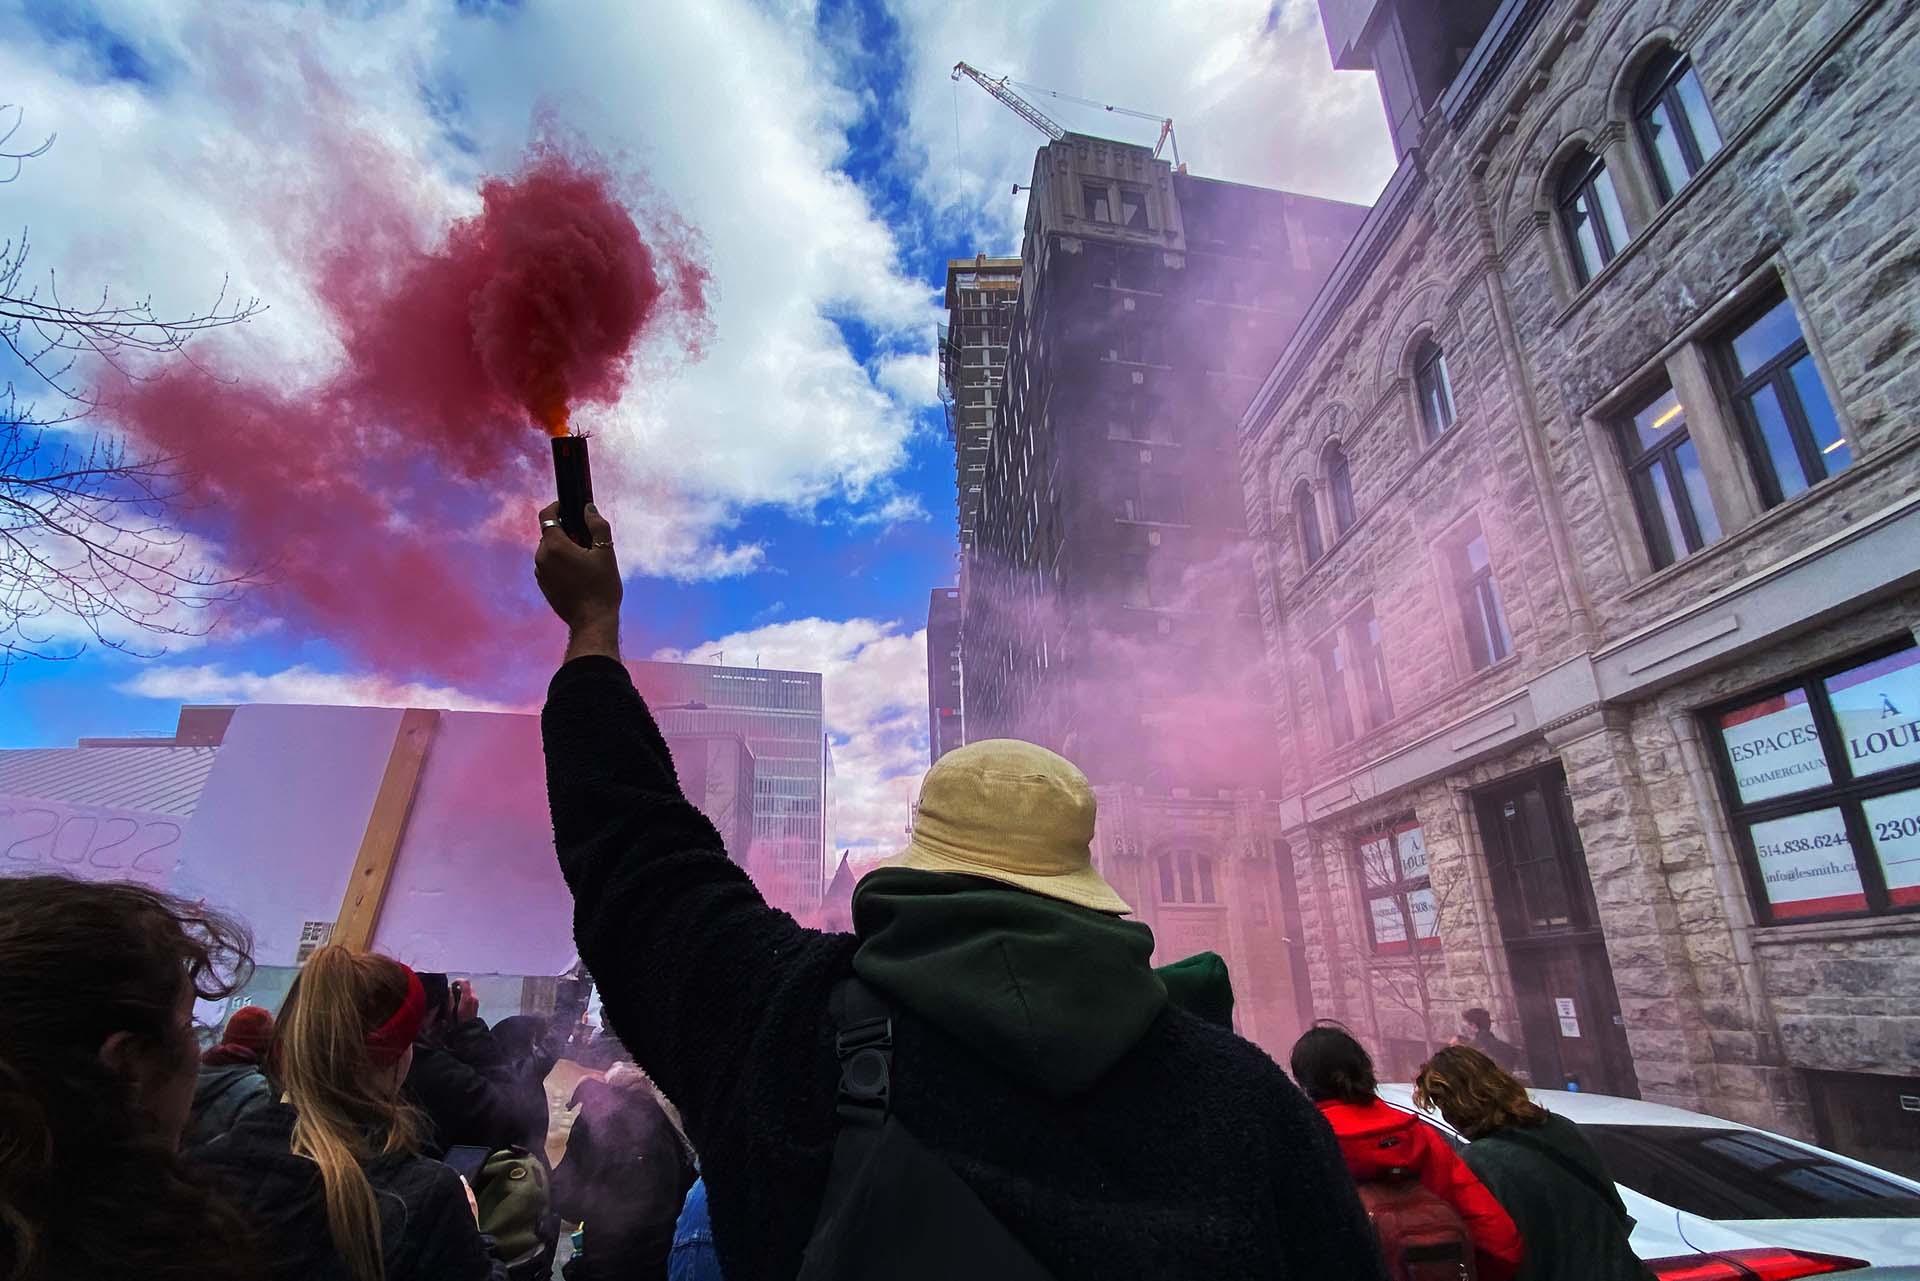 A man in a demonstration holds a smoke bomb. Red smoke comes out of it.